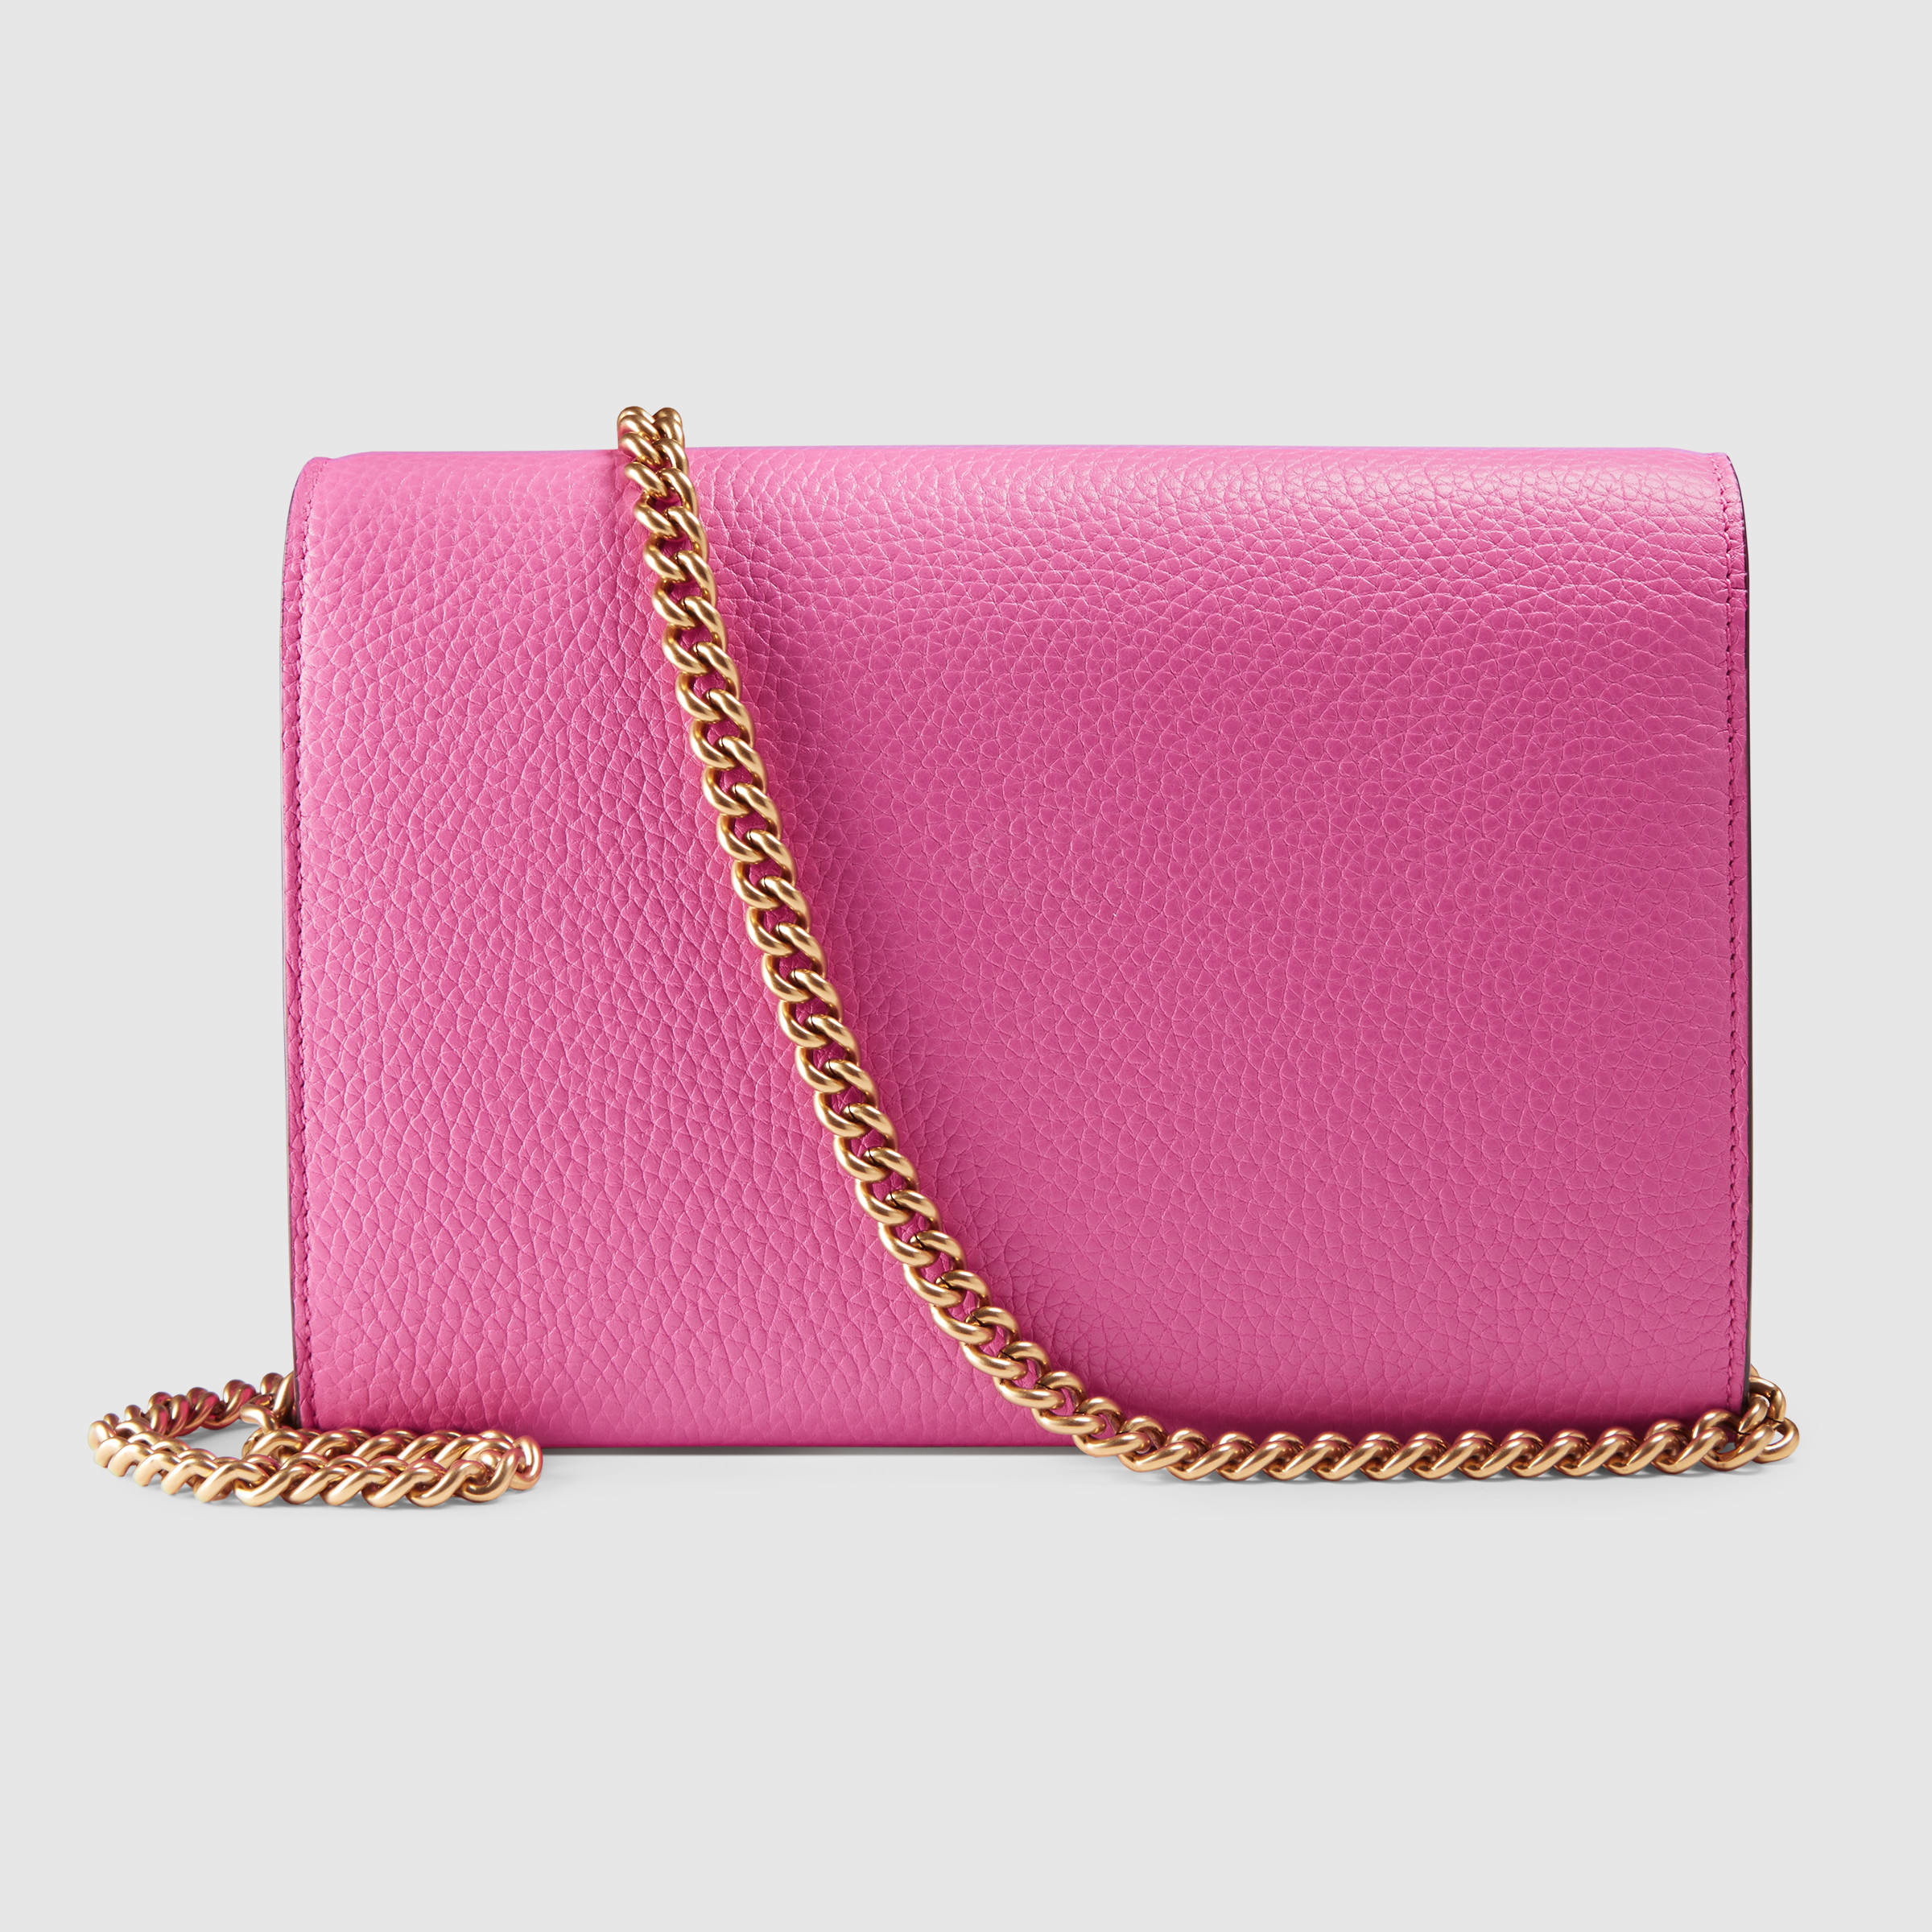 Gucci GG Marmont Leather Mini Chain Bag in Pink - Lyst